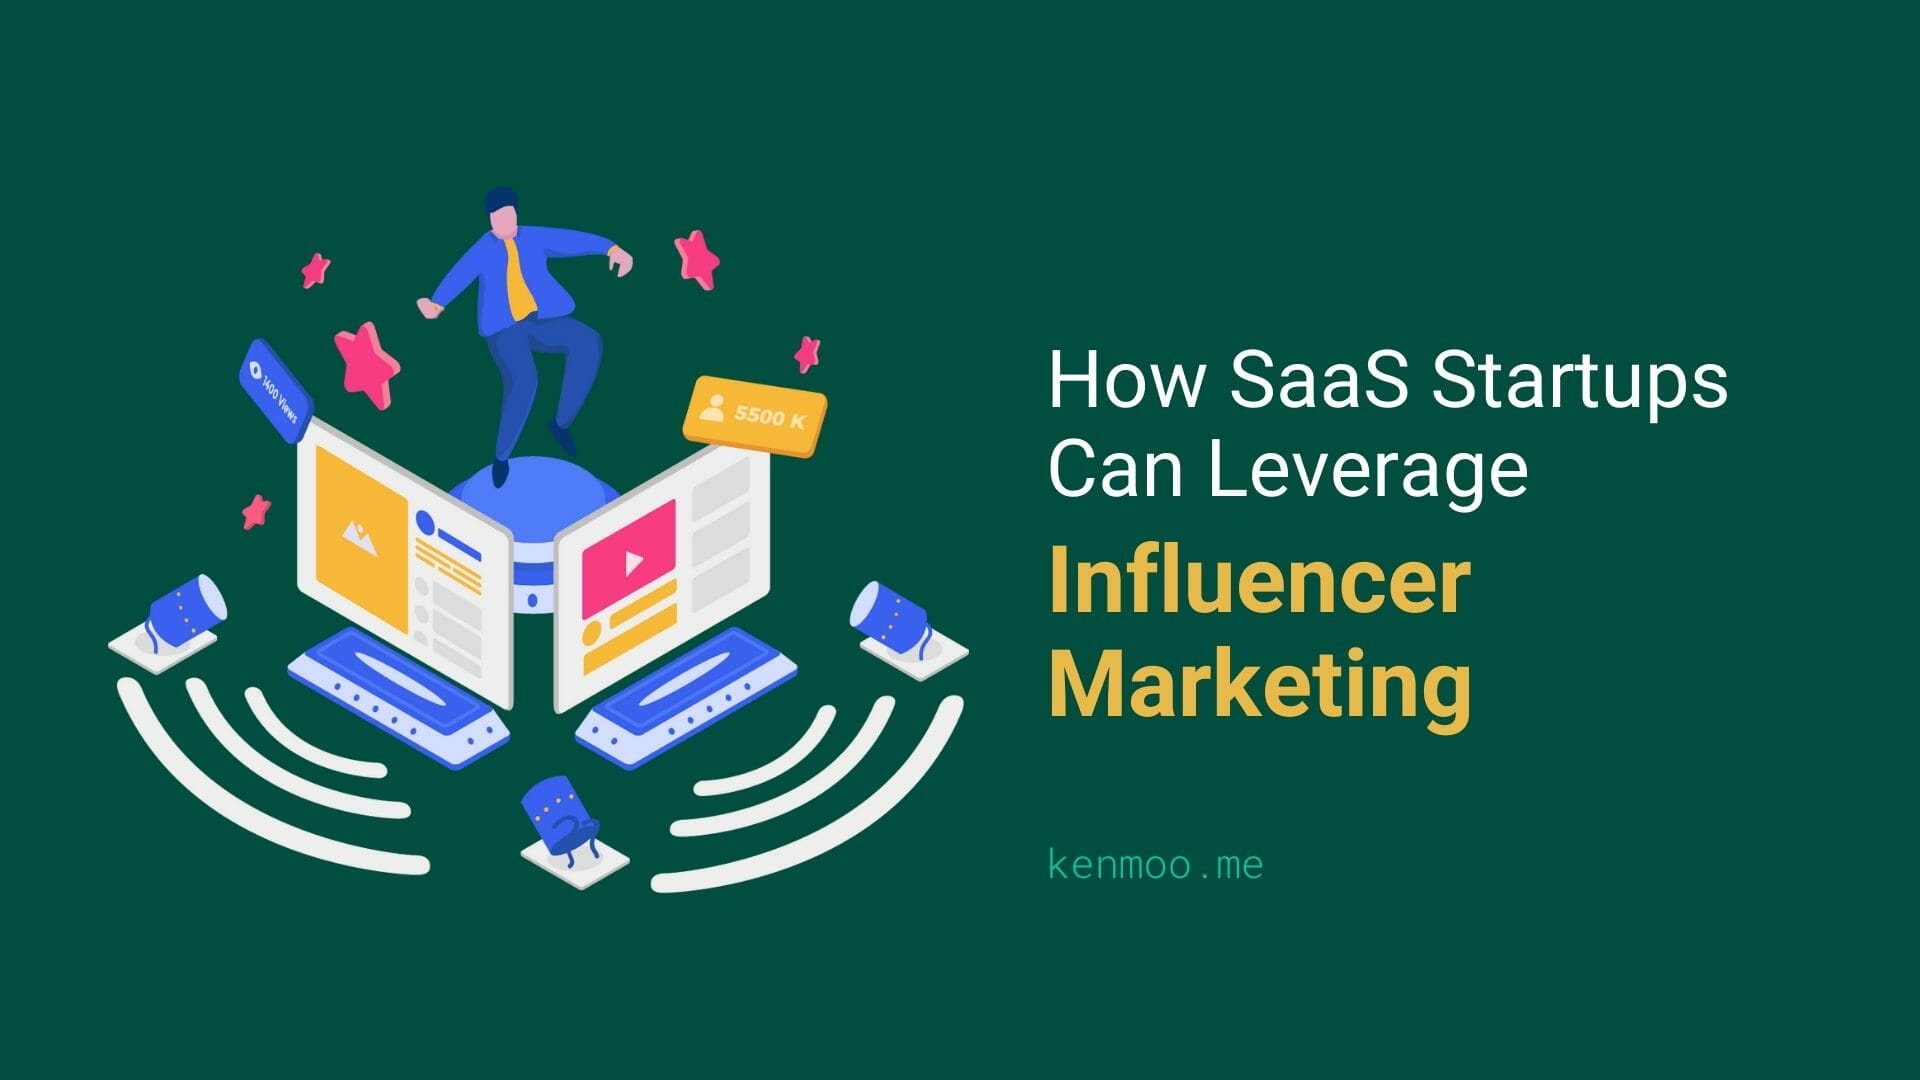 How SaaS Startups Can Leverage Influencer Marketing